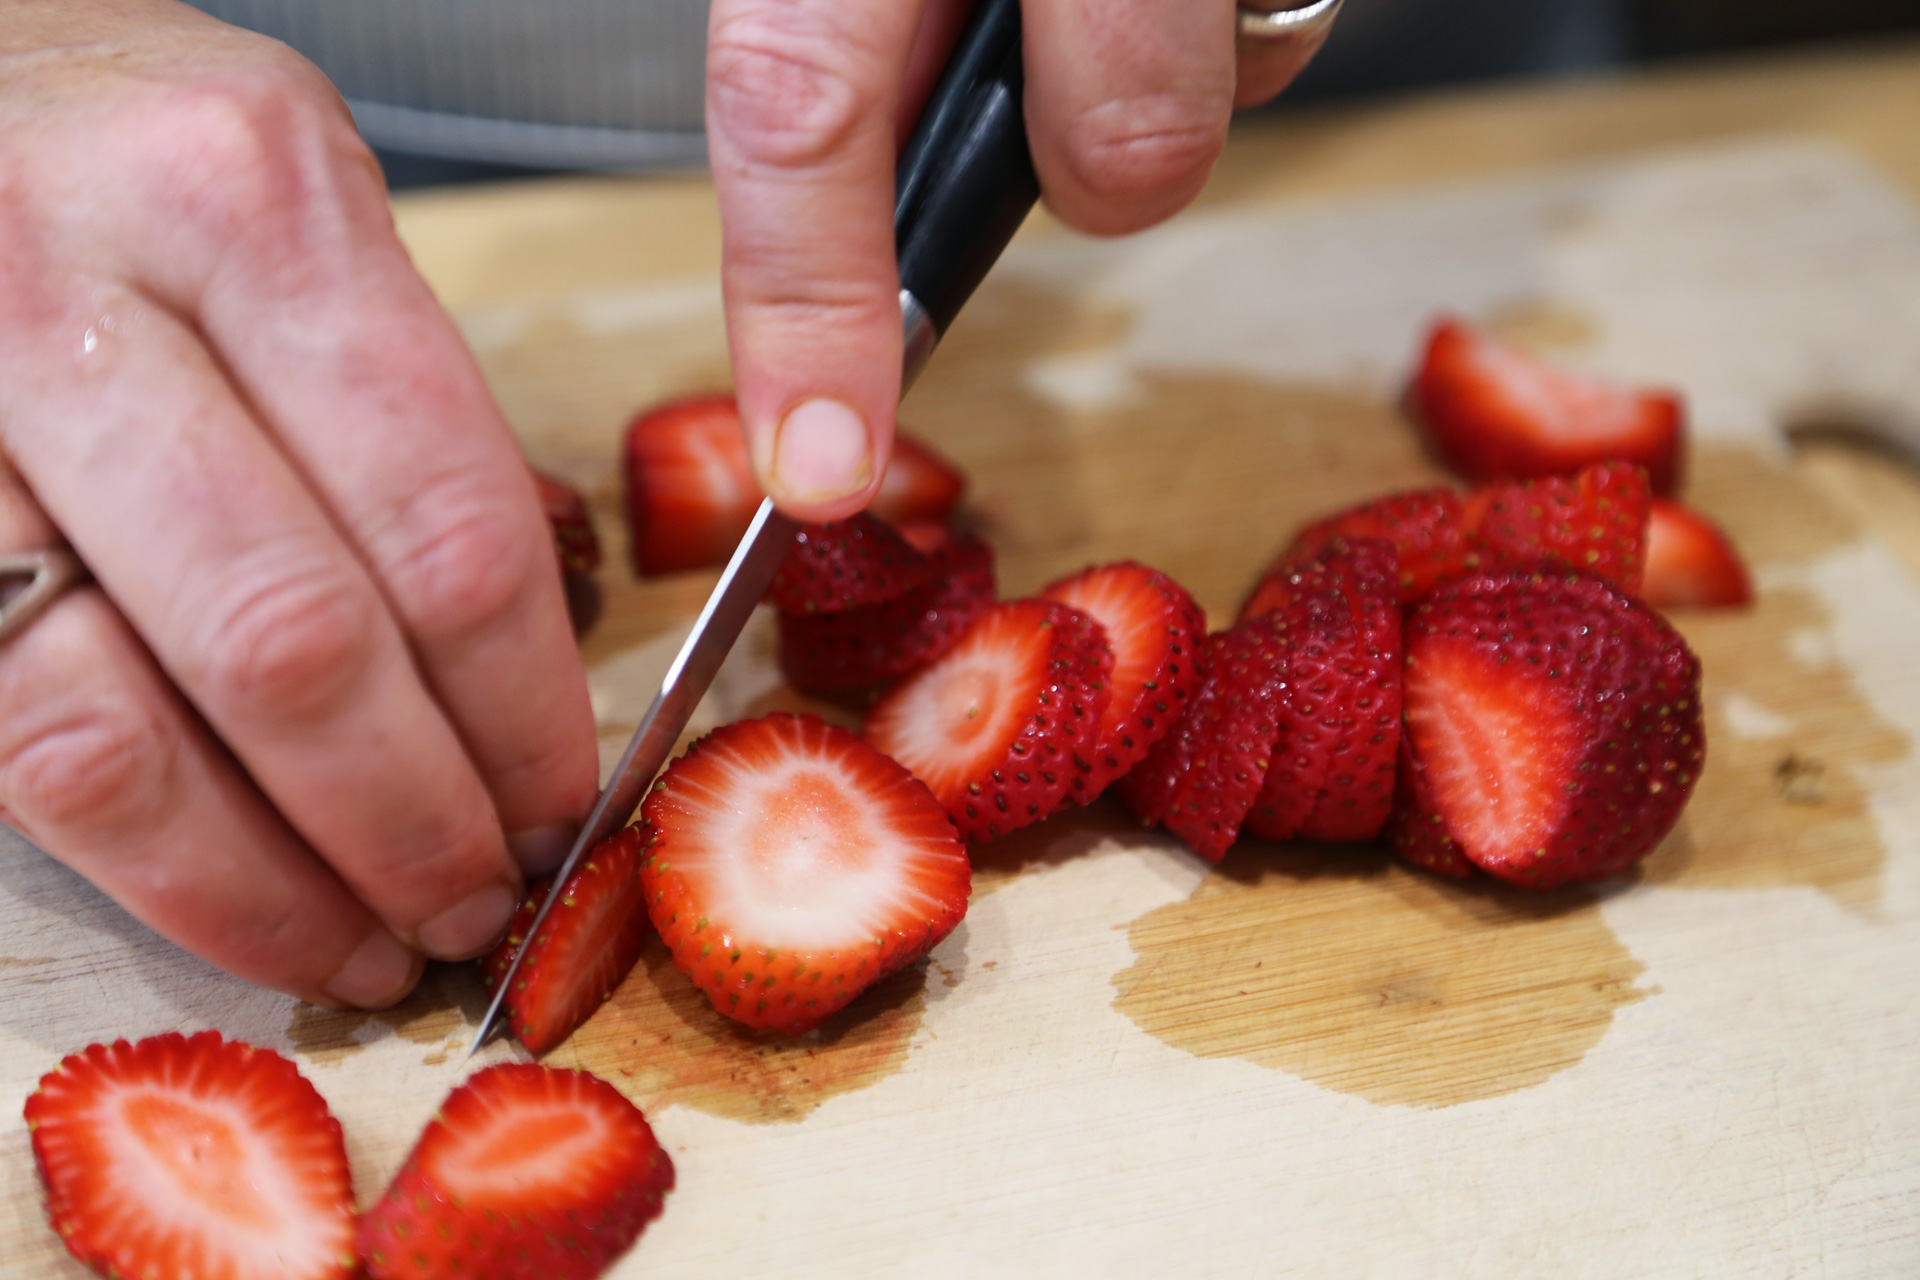 Strawberries, hulled and sliced